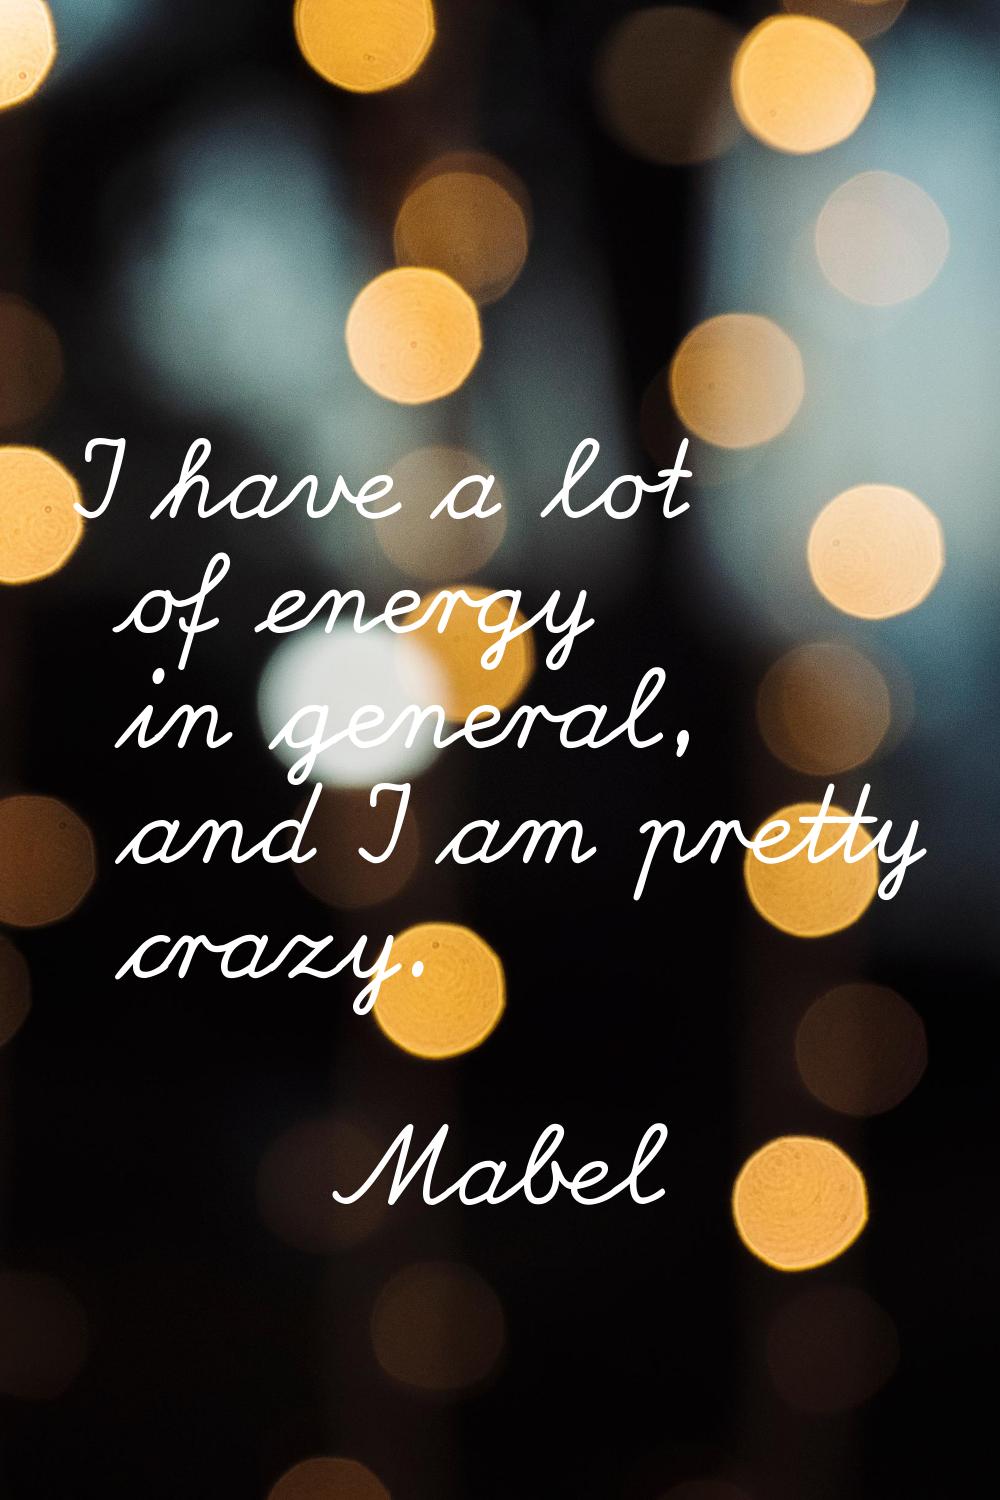 I have a lot of energy in general, and I am pretty crazy.